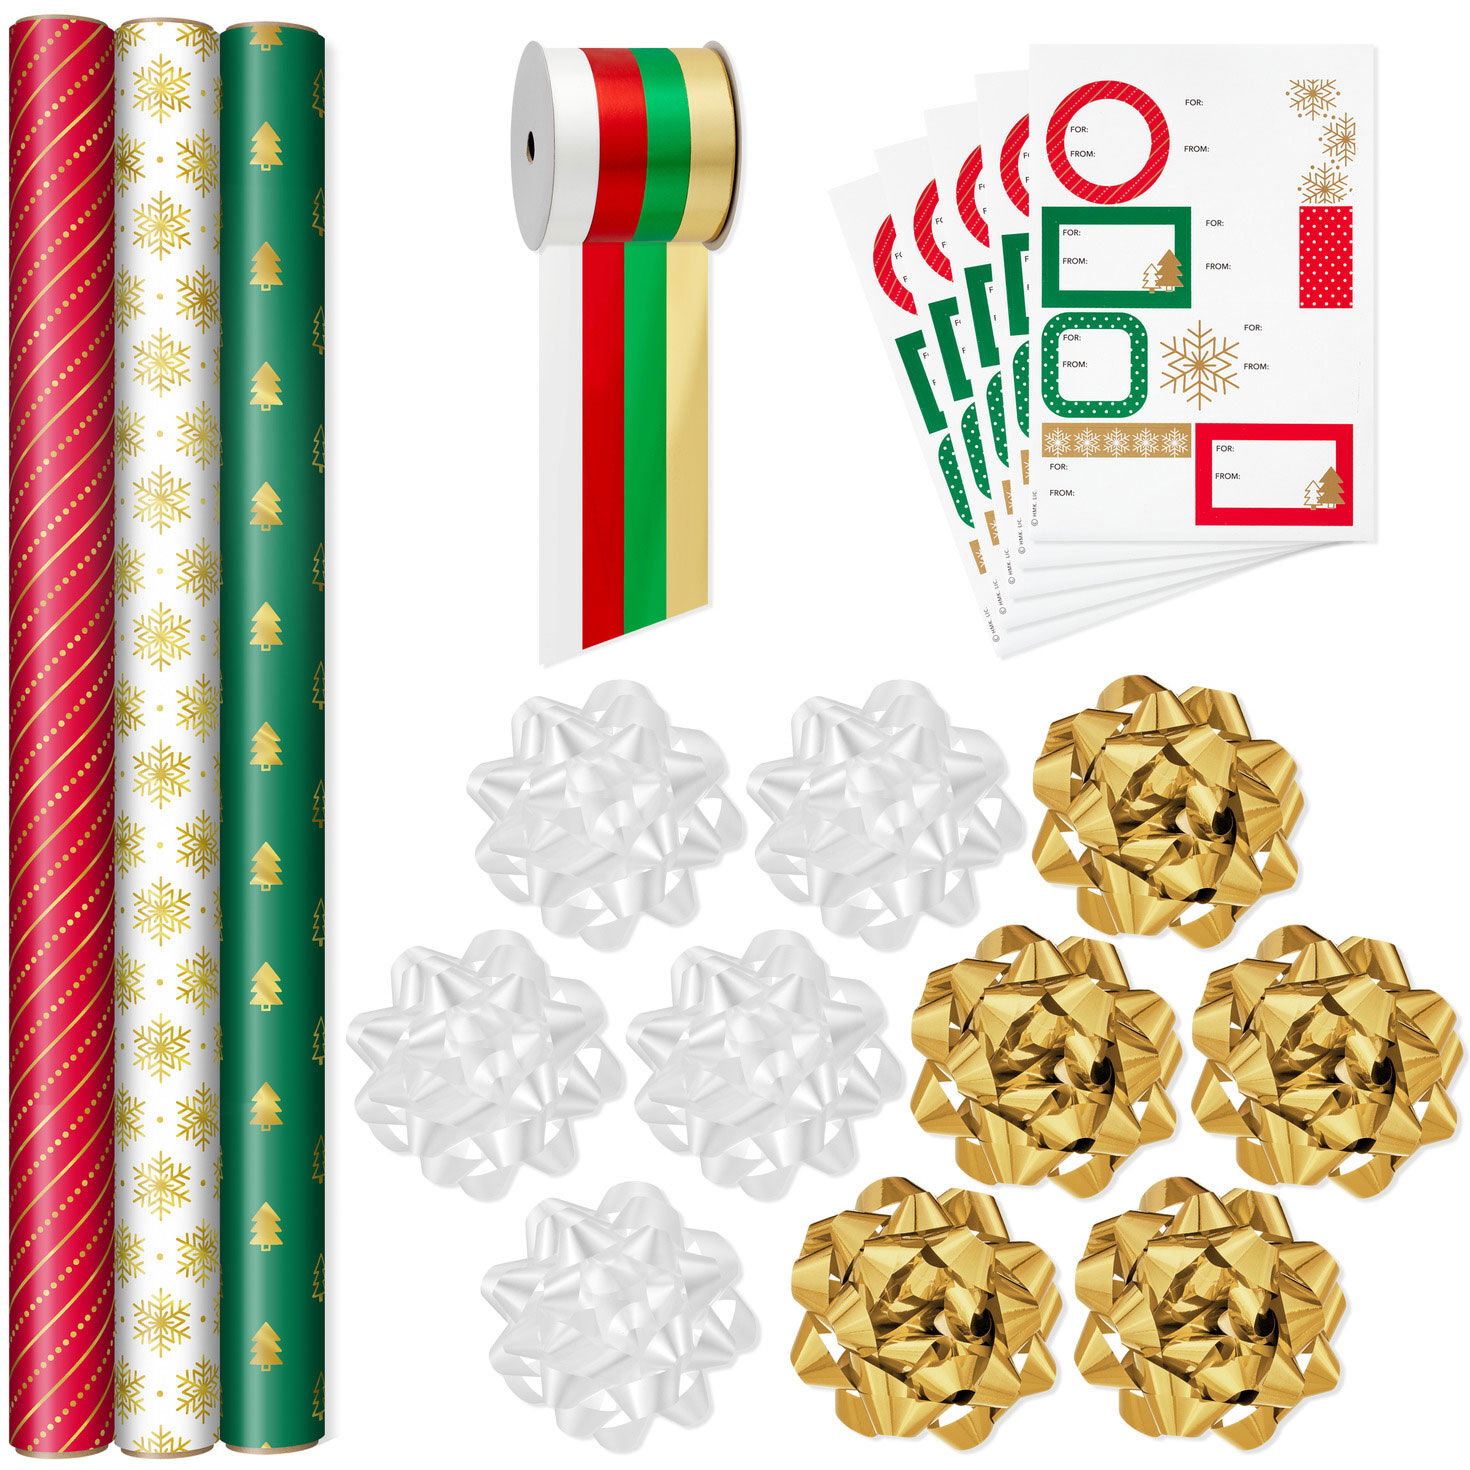 Hallmark Holiday Gift Wrap Accessory Kit (Red Truck, Tree, Snowflake) 6  Gift Bows, 12 Gift Tags, 9 Yards of Twine - Kraft, Red, Green, White